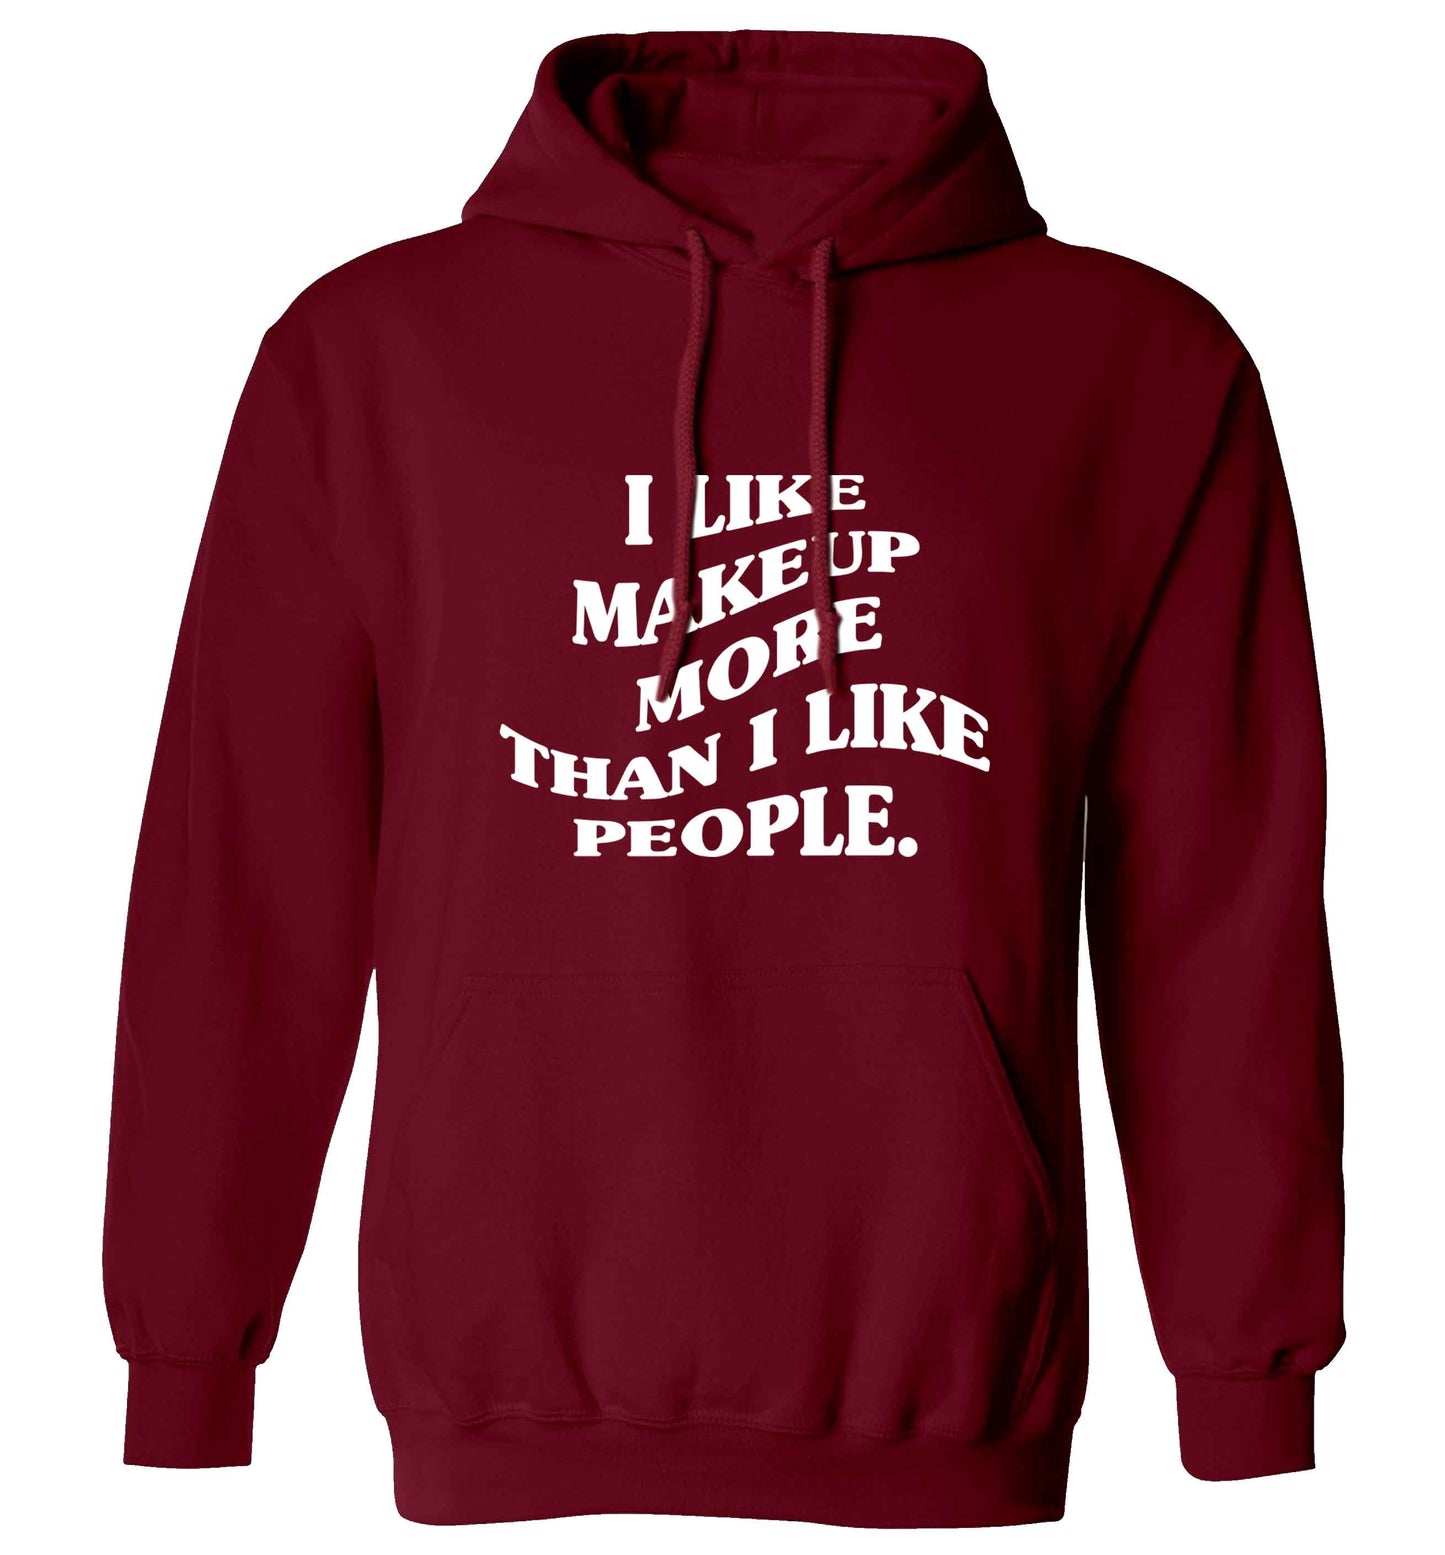 I like makeup more than people adults unisex maroon hoodie 2XL